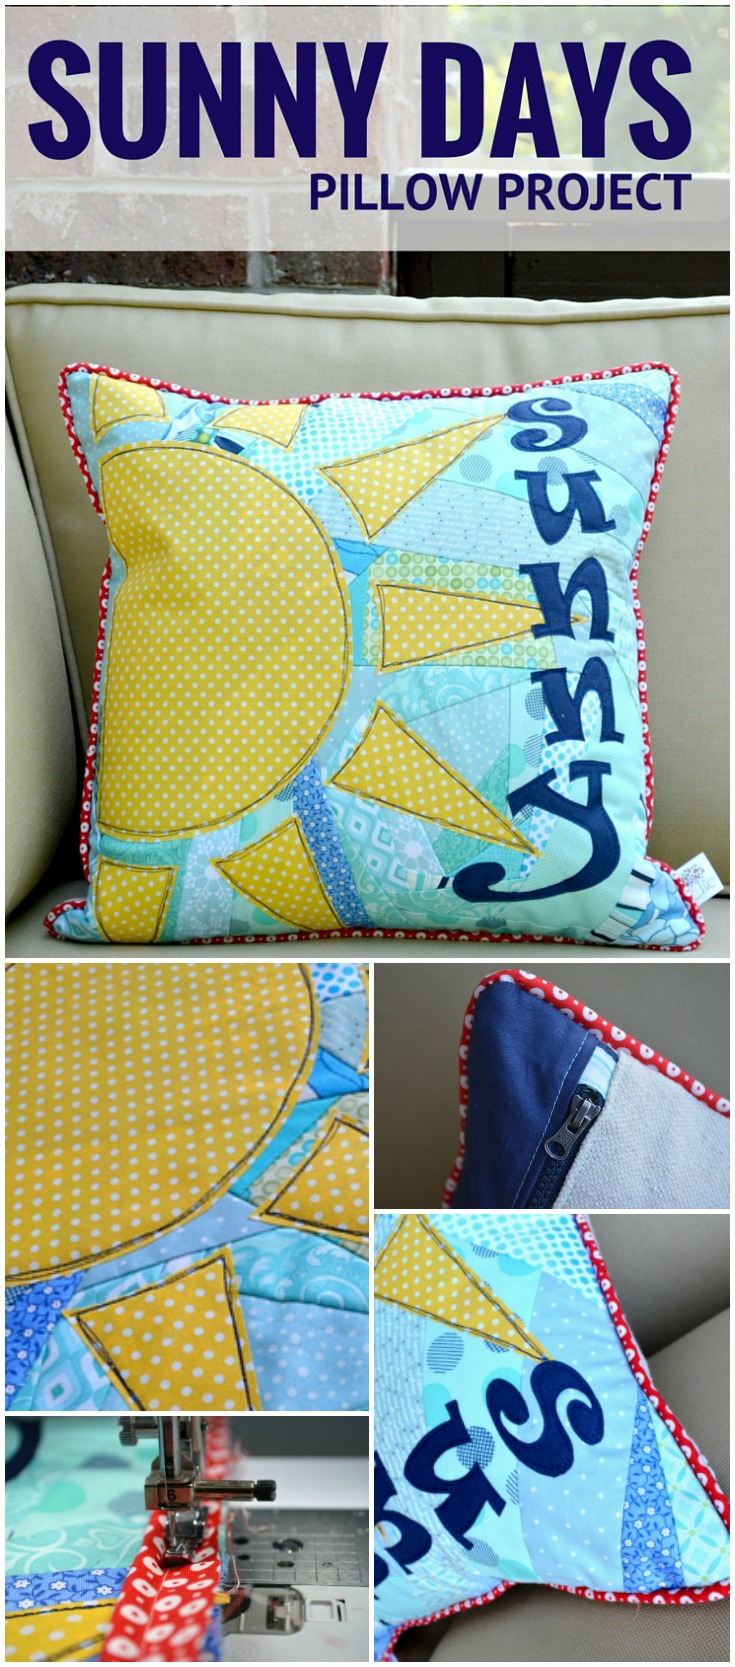 Love this scrappy pillow! It's the perfect sewing pattern to clean out my stash. The instructions are easy to follow and the applique design is so cute. 